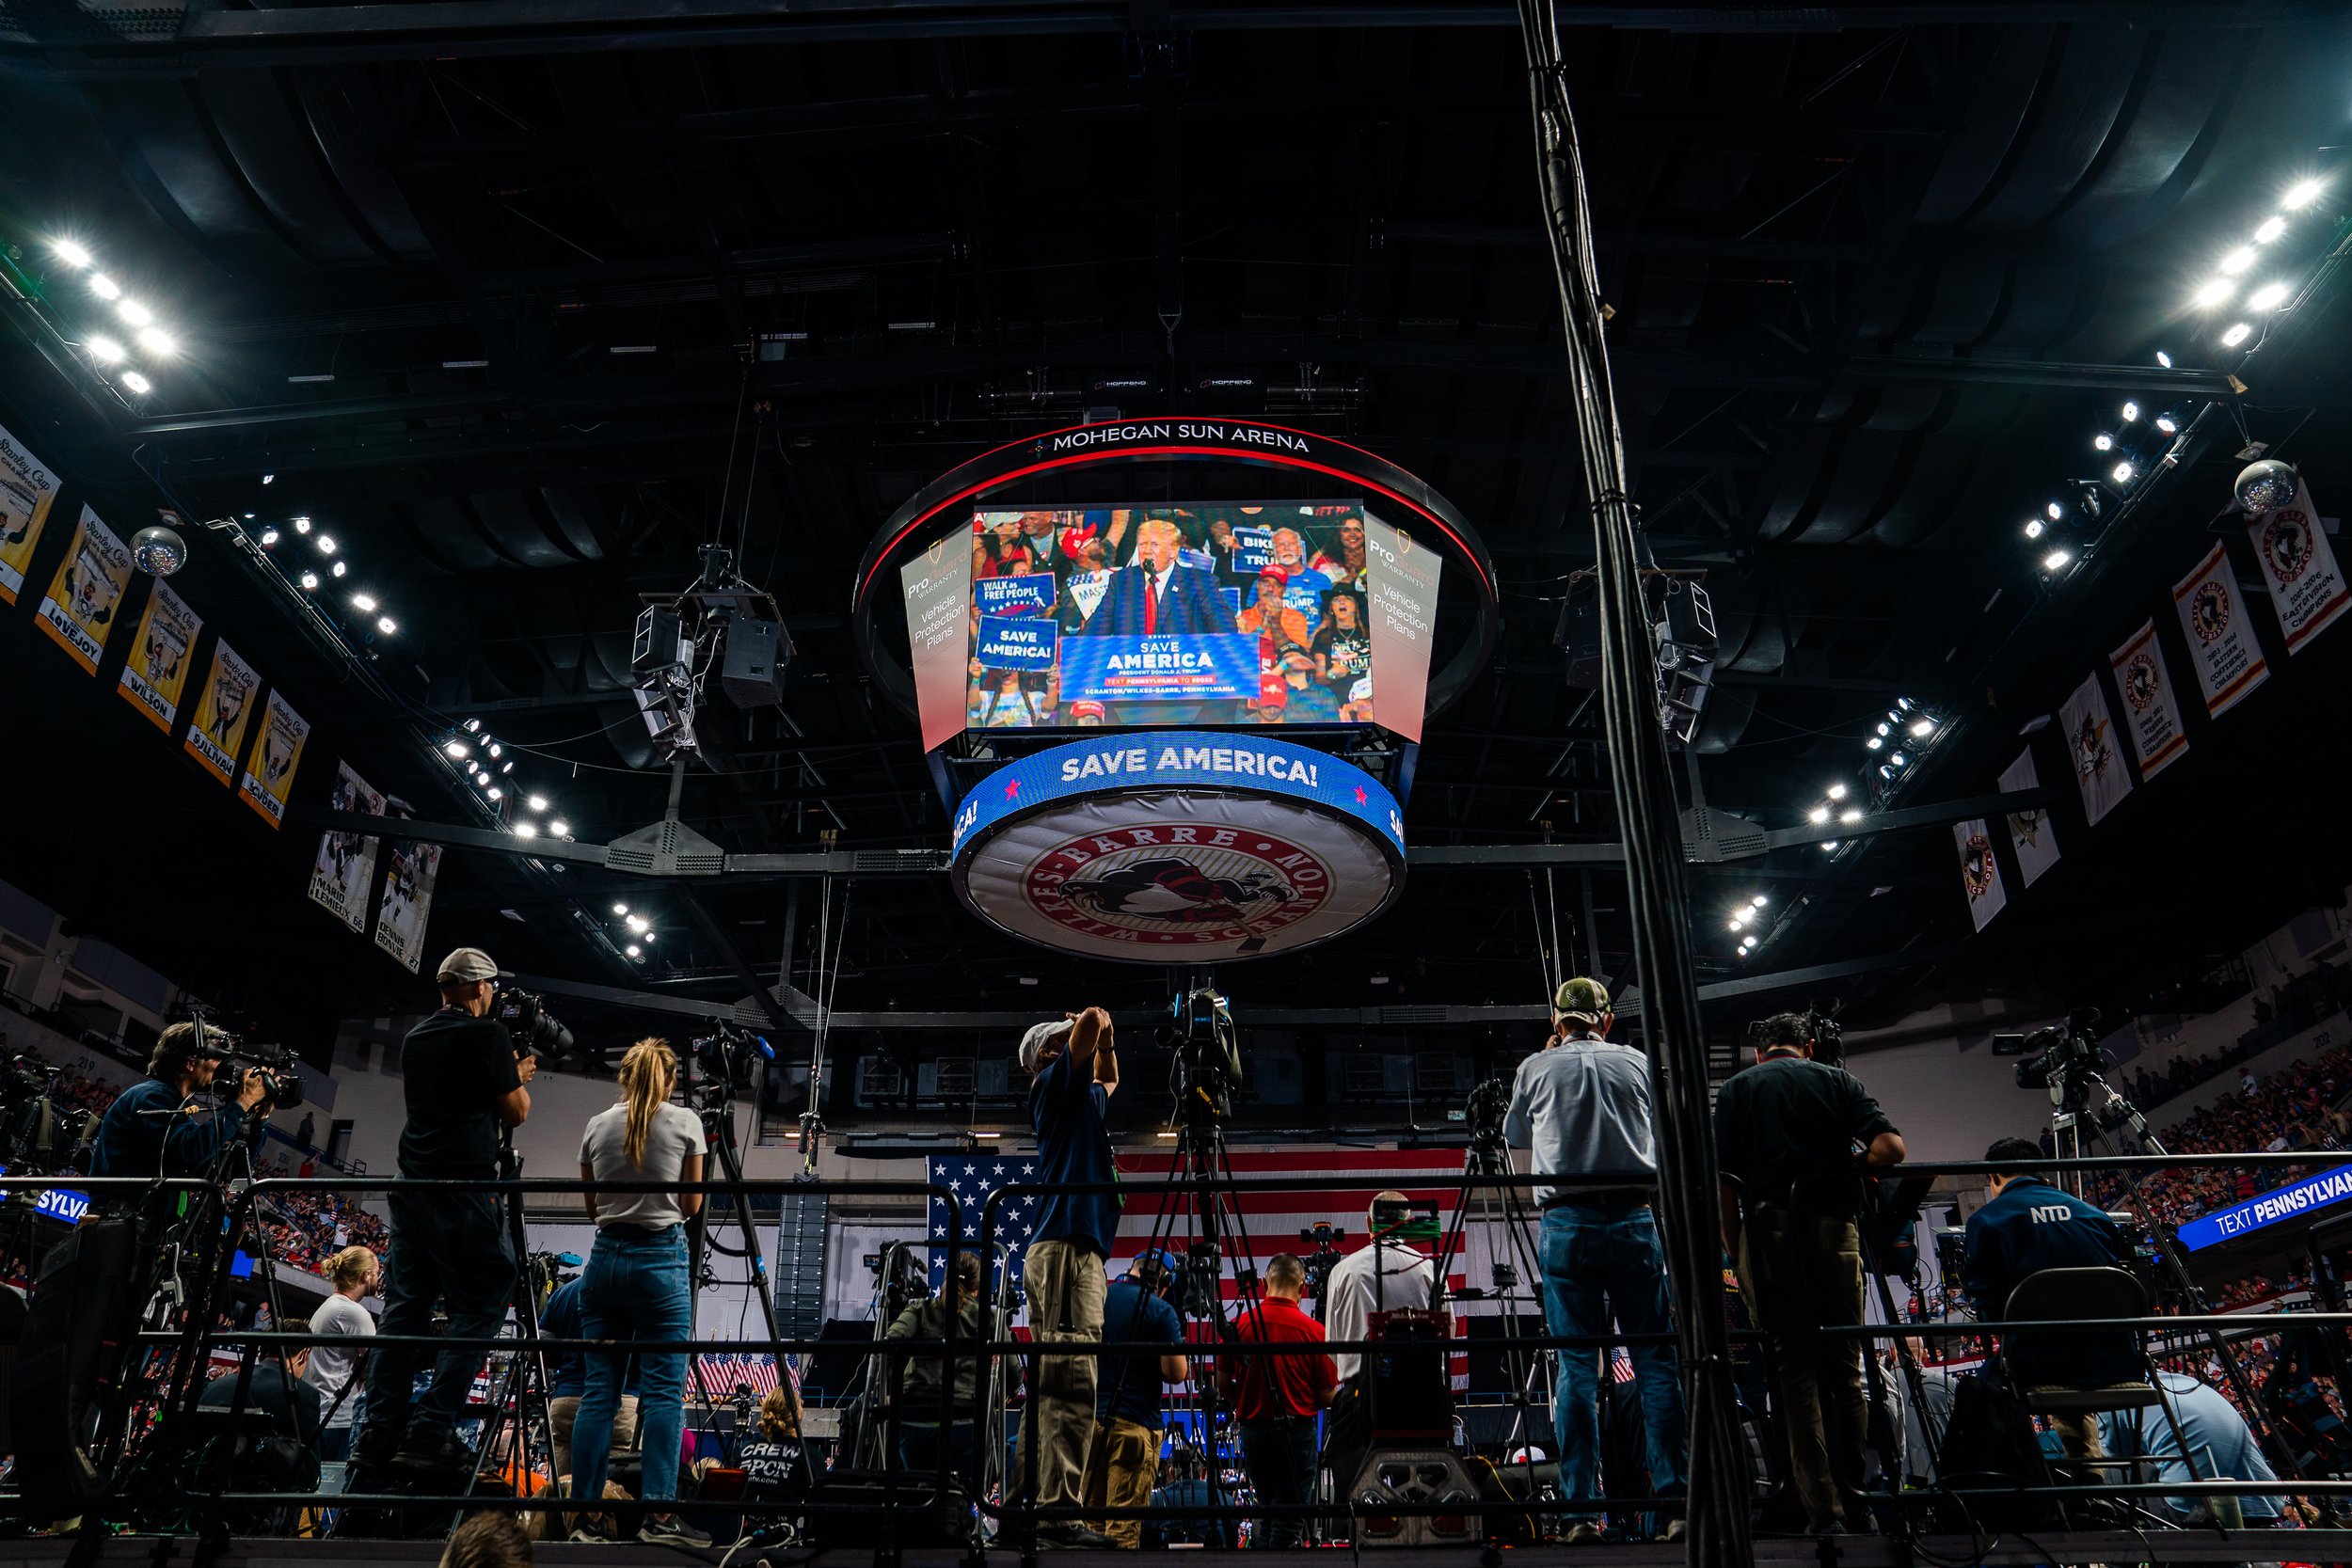  Former US President Donald J. Trump on screen during a rally for Pennsylvania Republican candidate Dr. Mehmet Oz and gubernatorial candidate Doug Mastriano at the Mohegan Sun Arena at Casey Plaza in Wilkes-Barre, PA.  